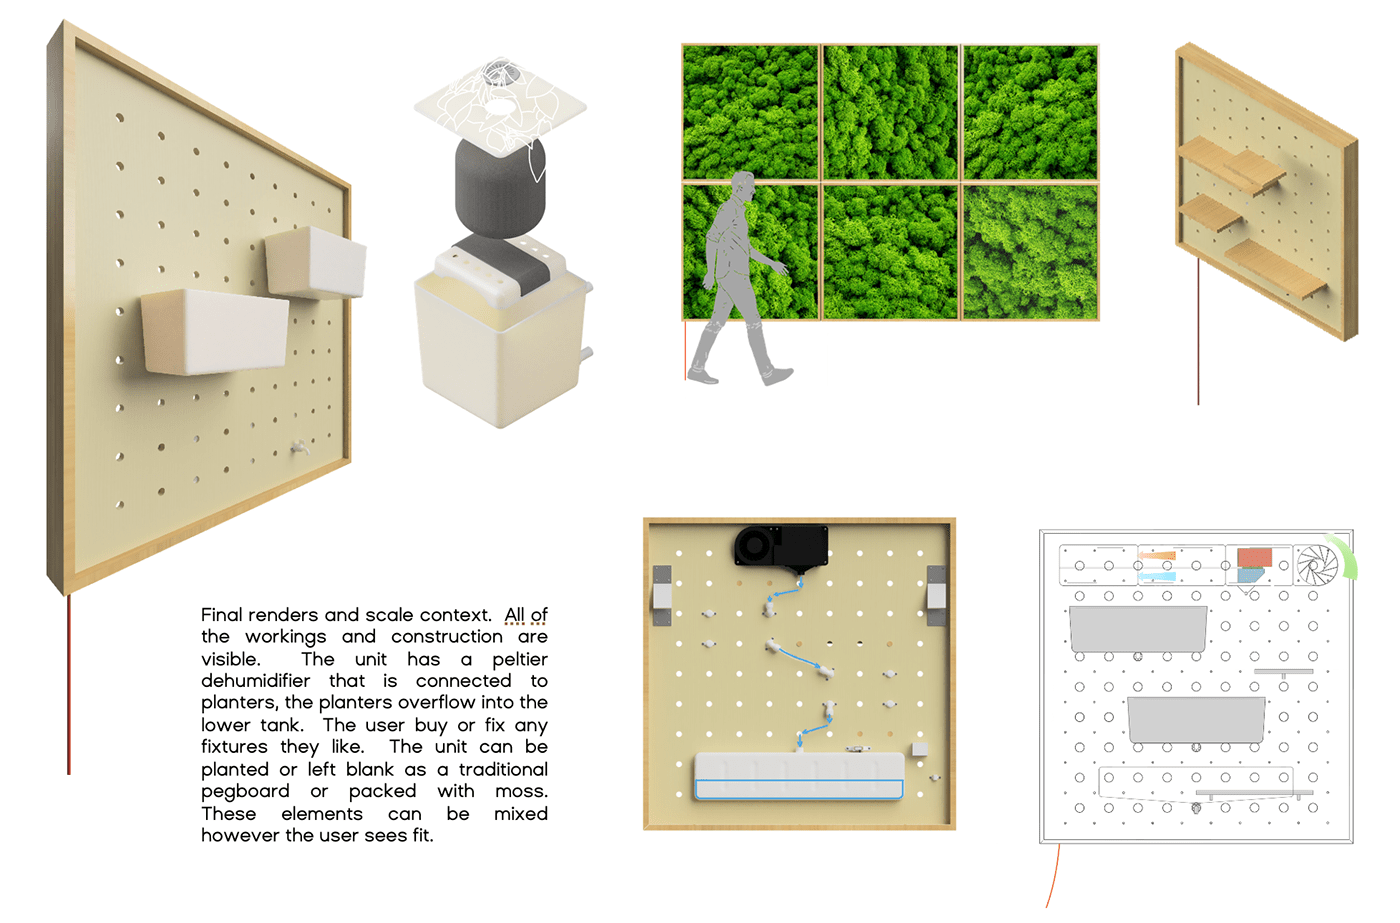 Dehumidifier design for manufacture human centred design pegboard Planter product design  Sustainability Sustainable Design User research